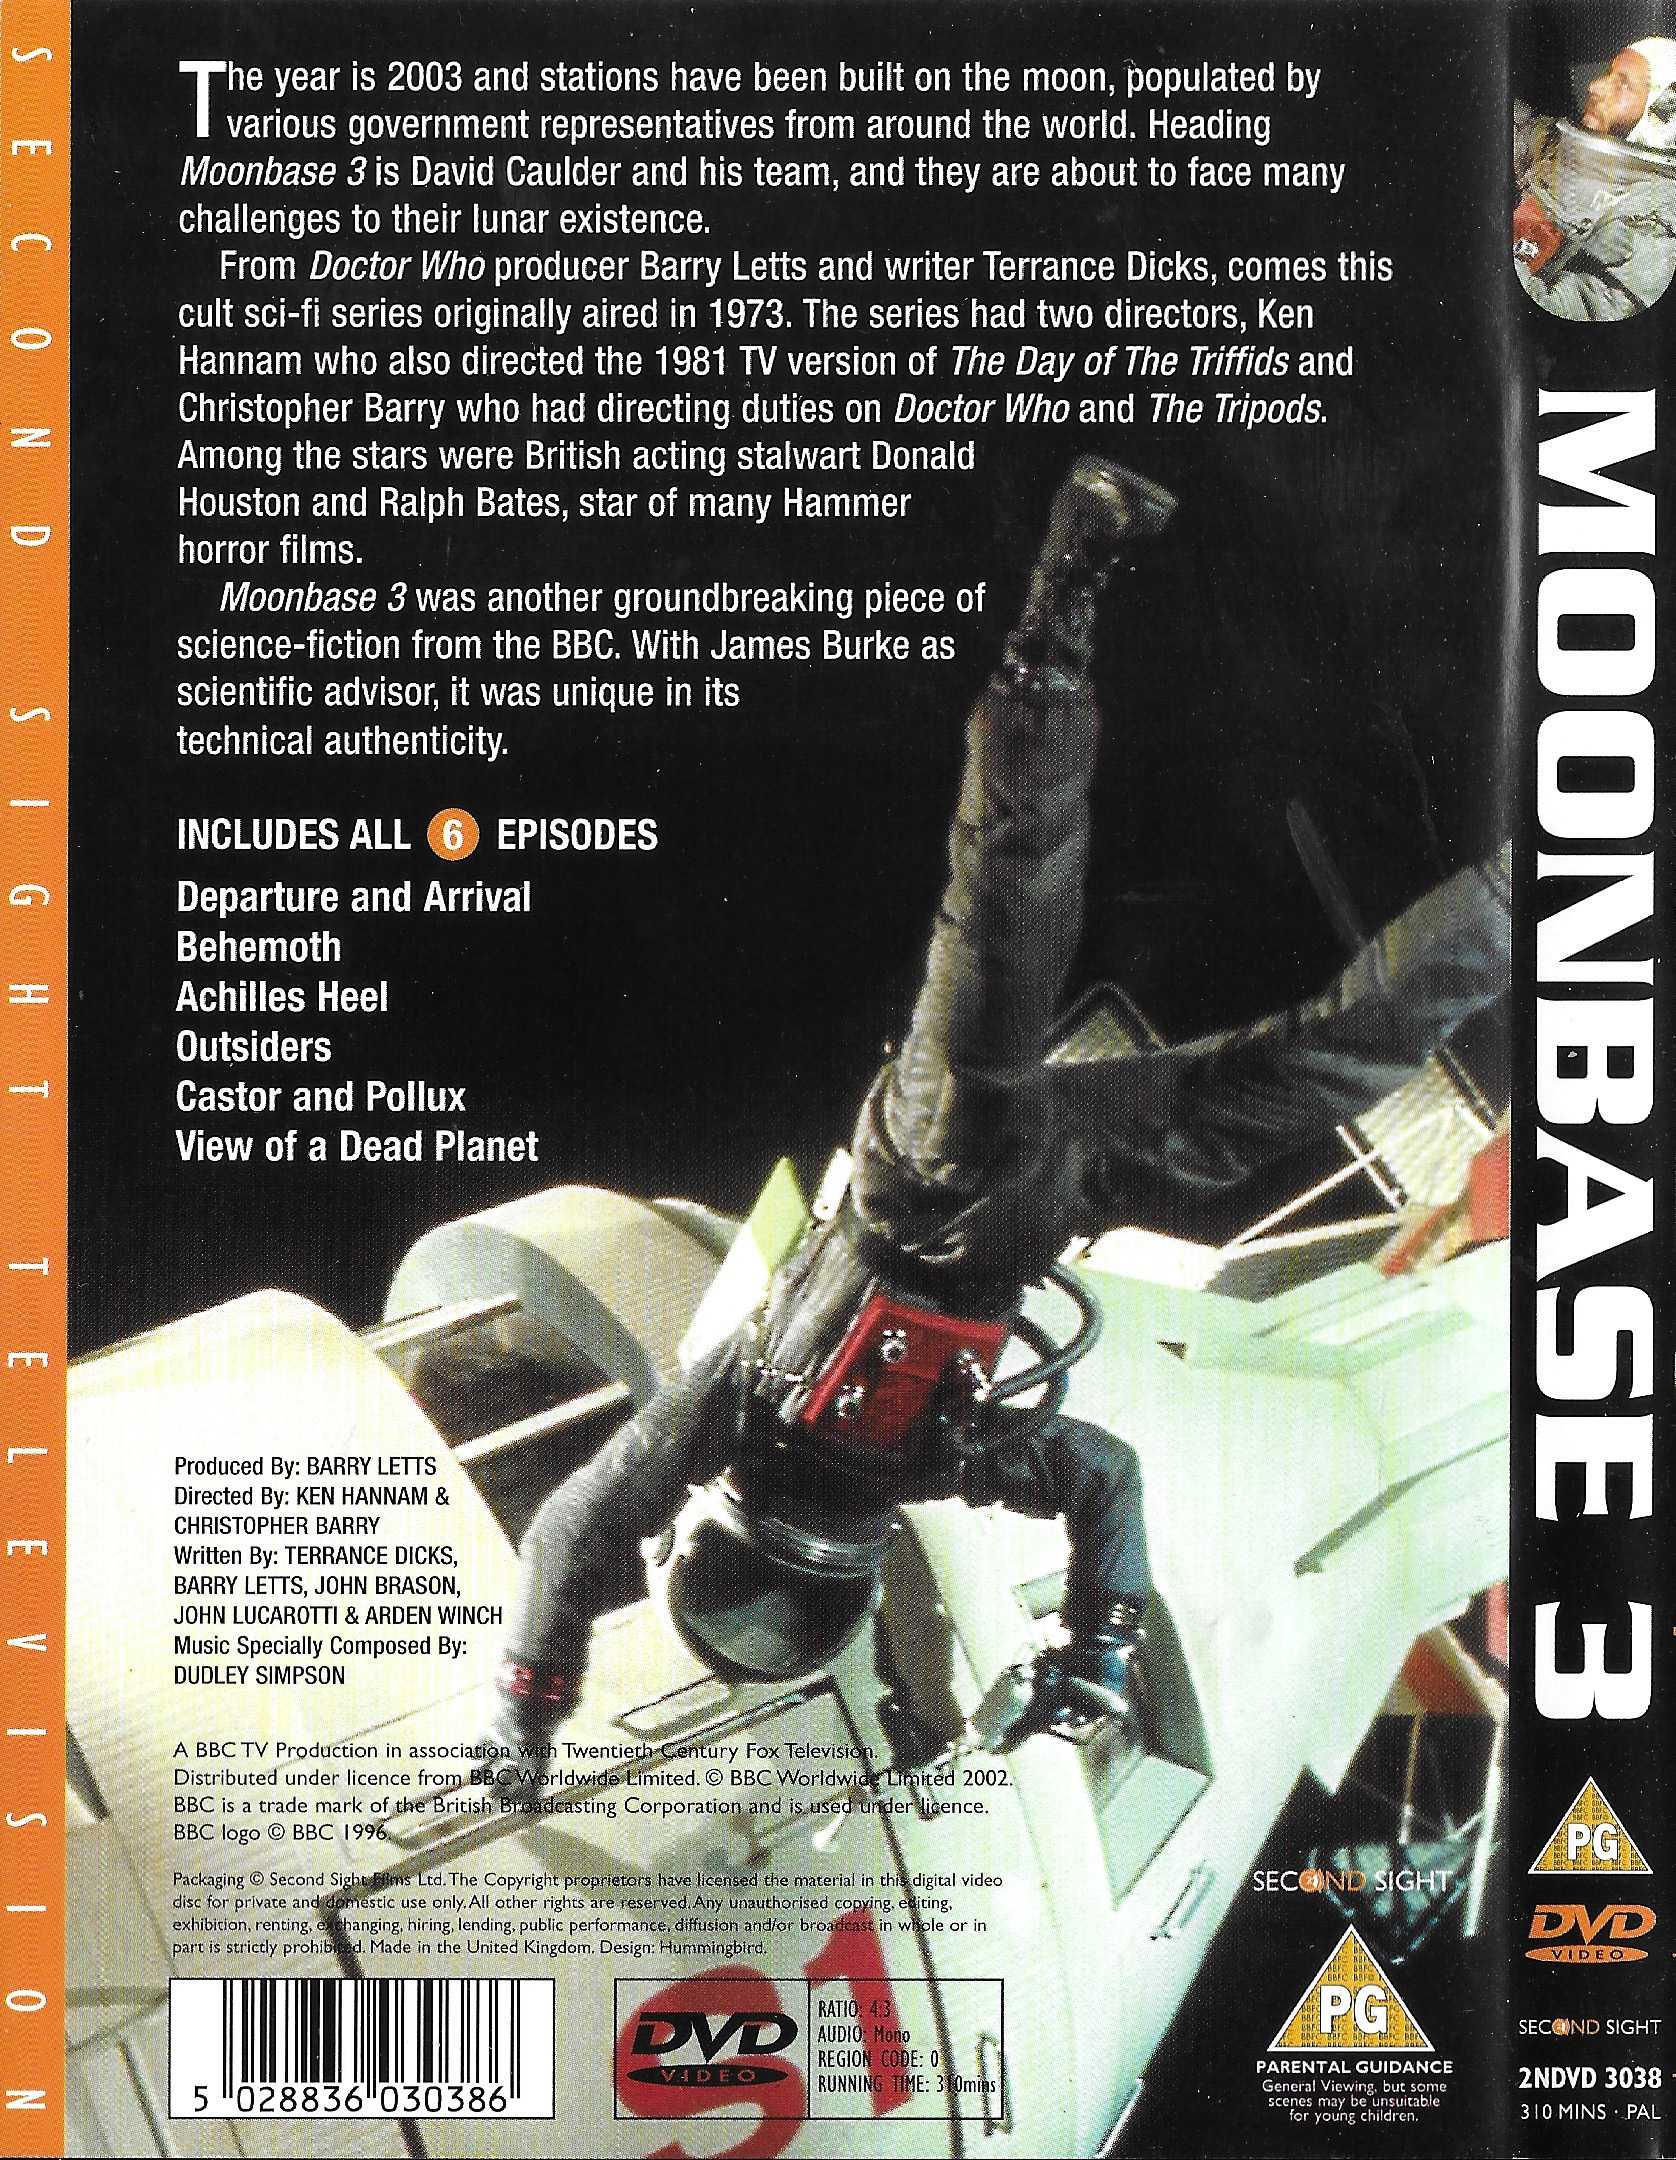 Back cover of 2NDVD 3038